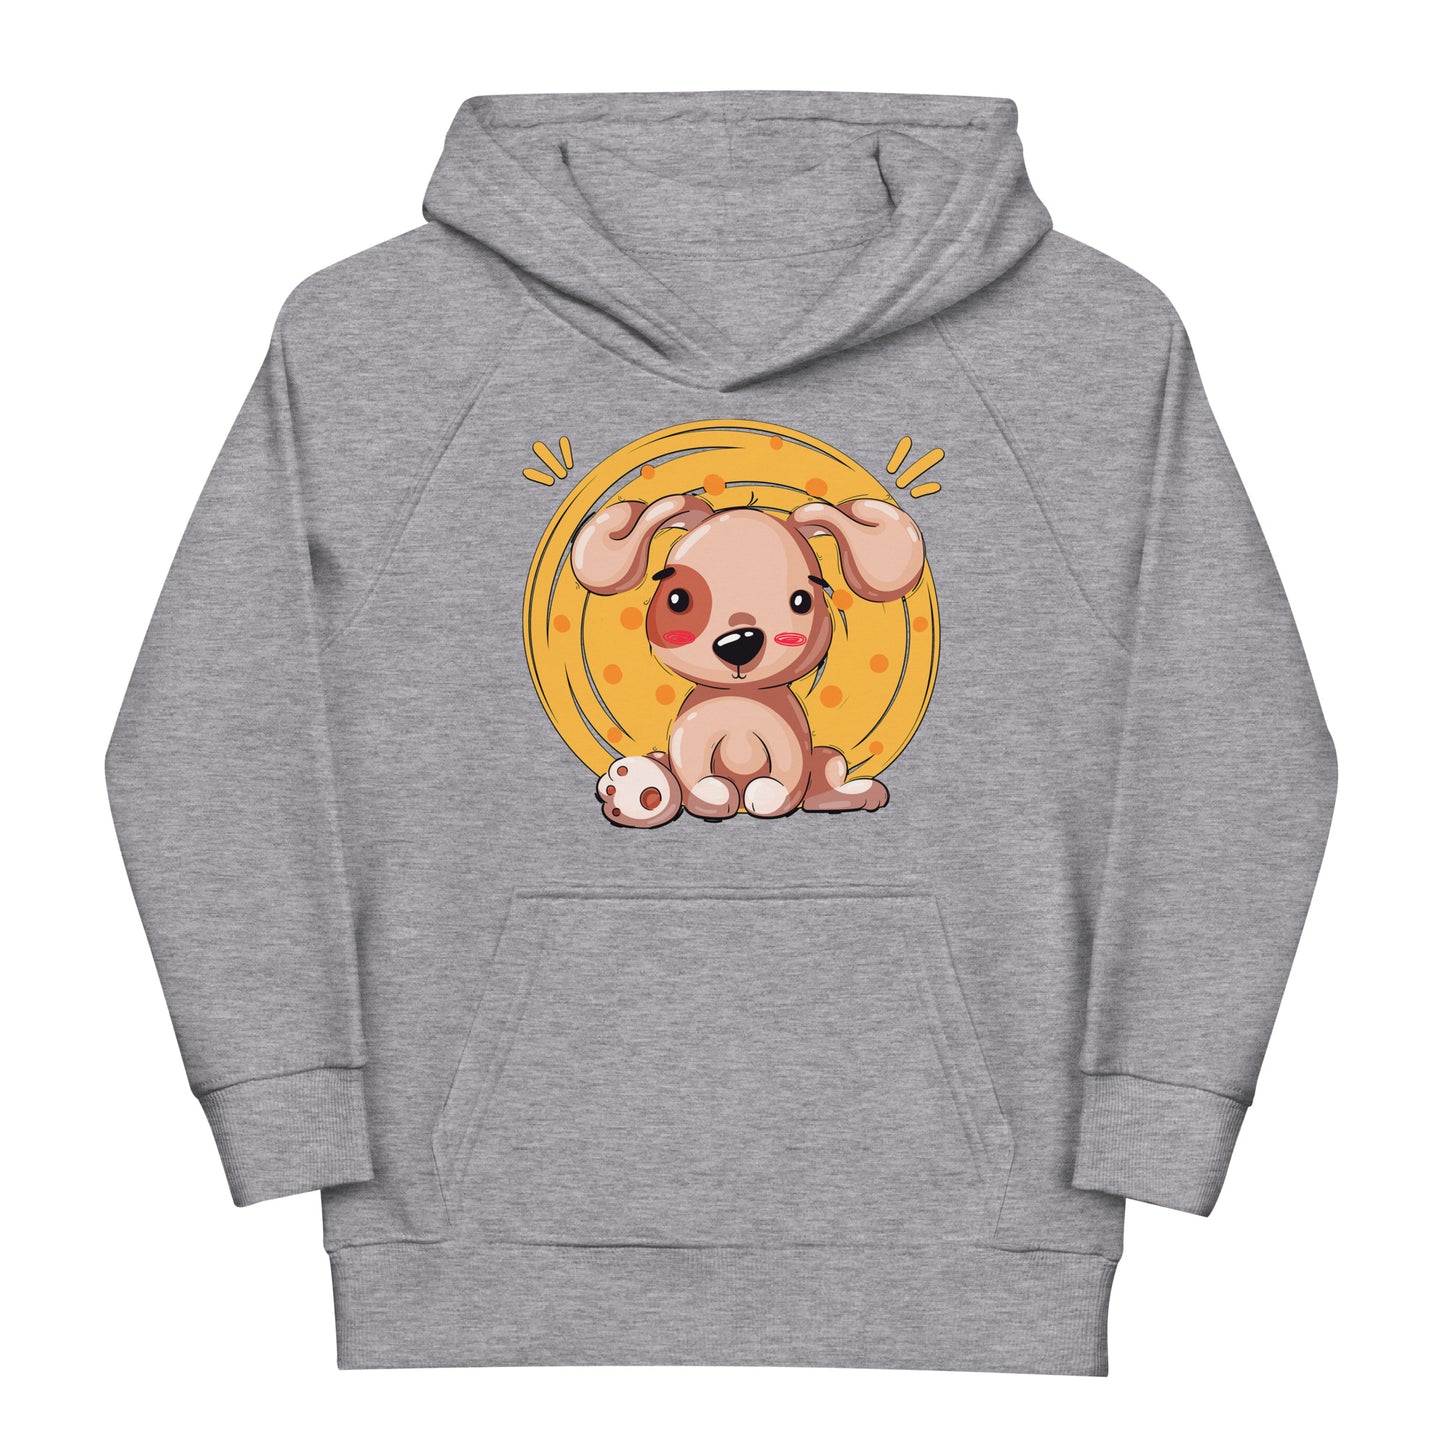 Lovely Puppy Dog Hoodie, No. 0483